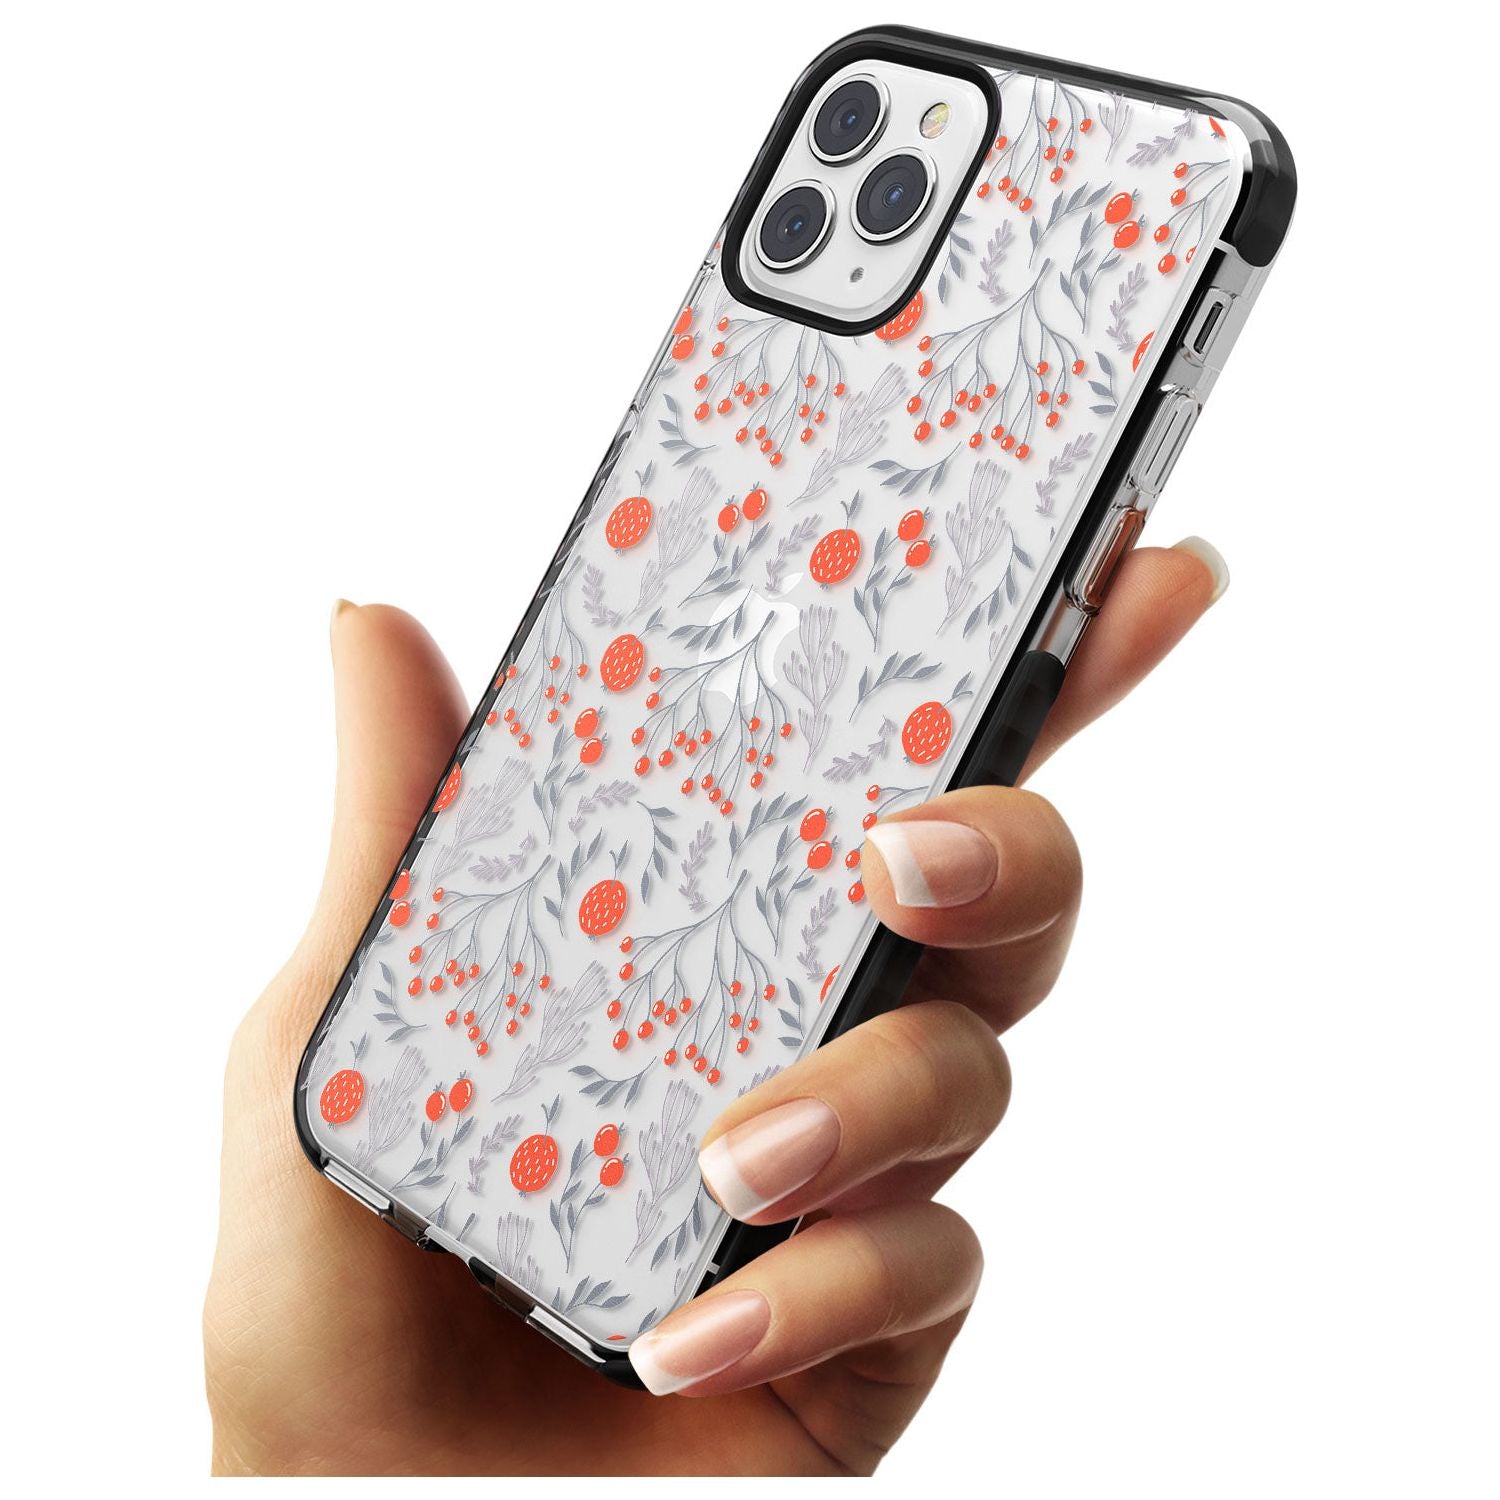 Red Fruits Transparent Floral Black Impact Phone Case for iPhone 11 Pro Max